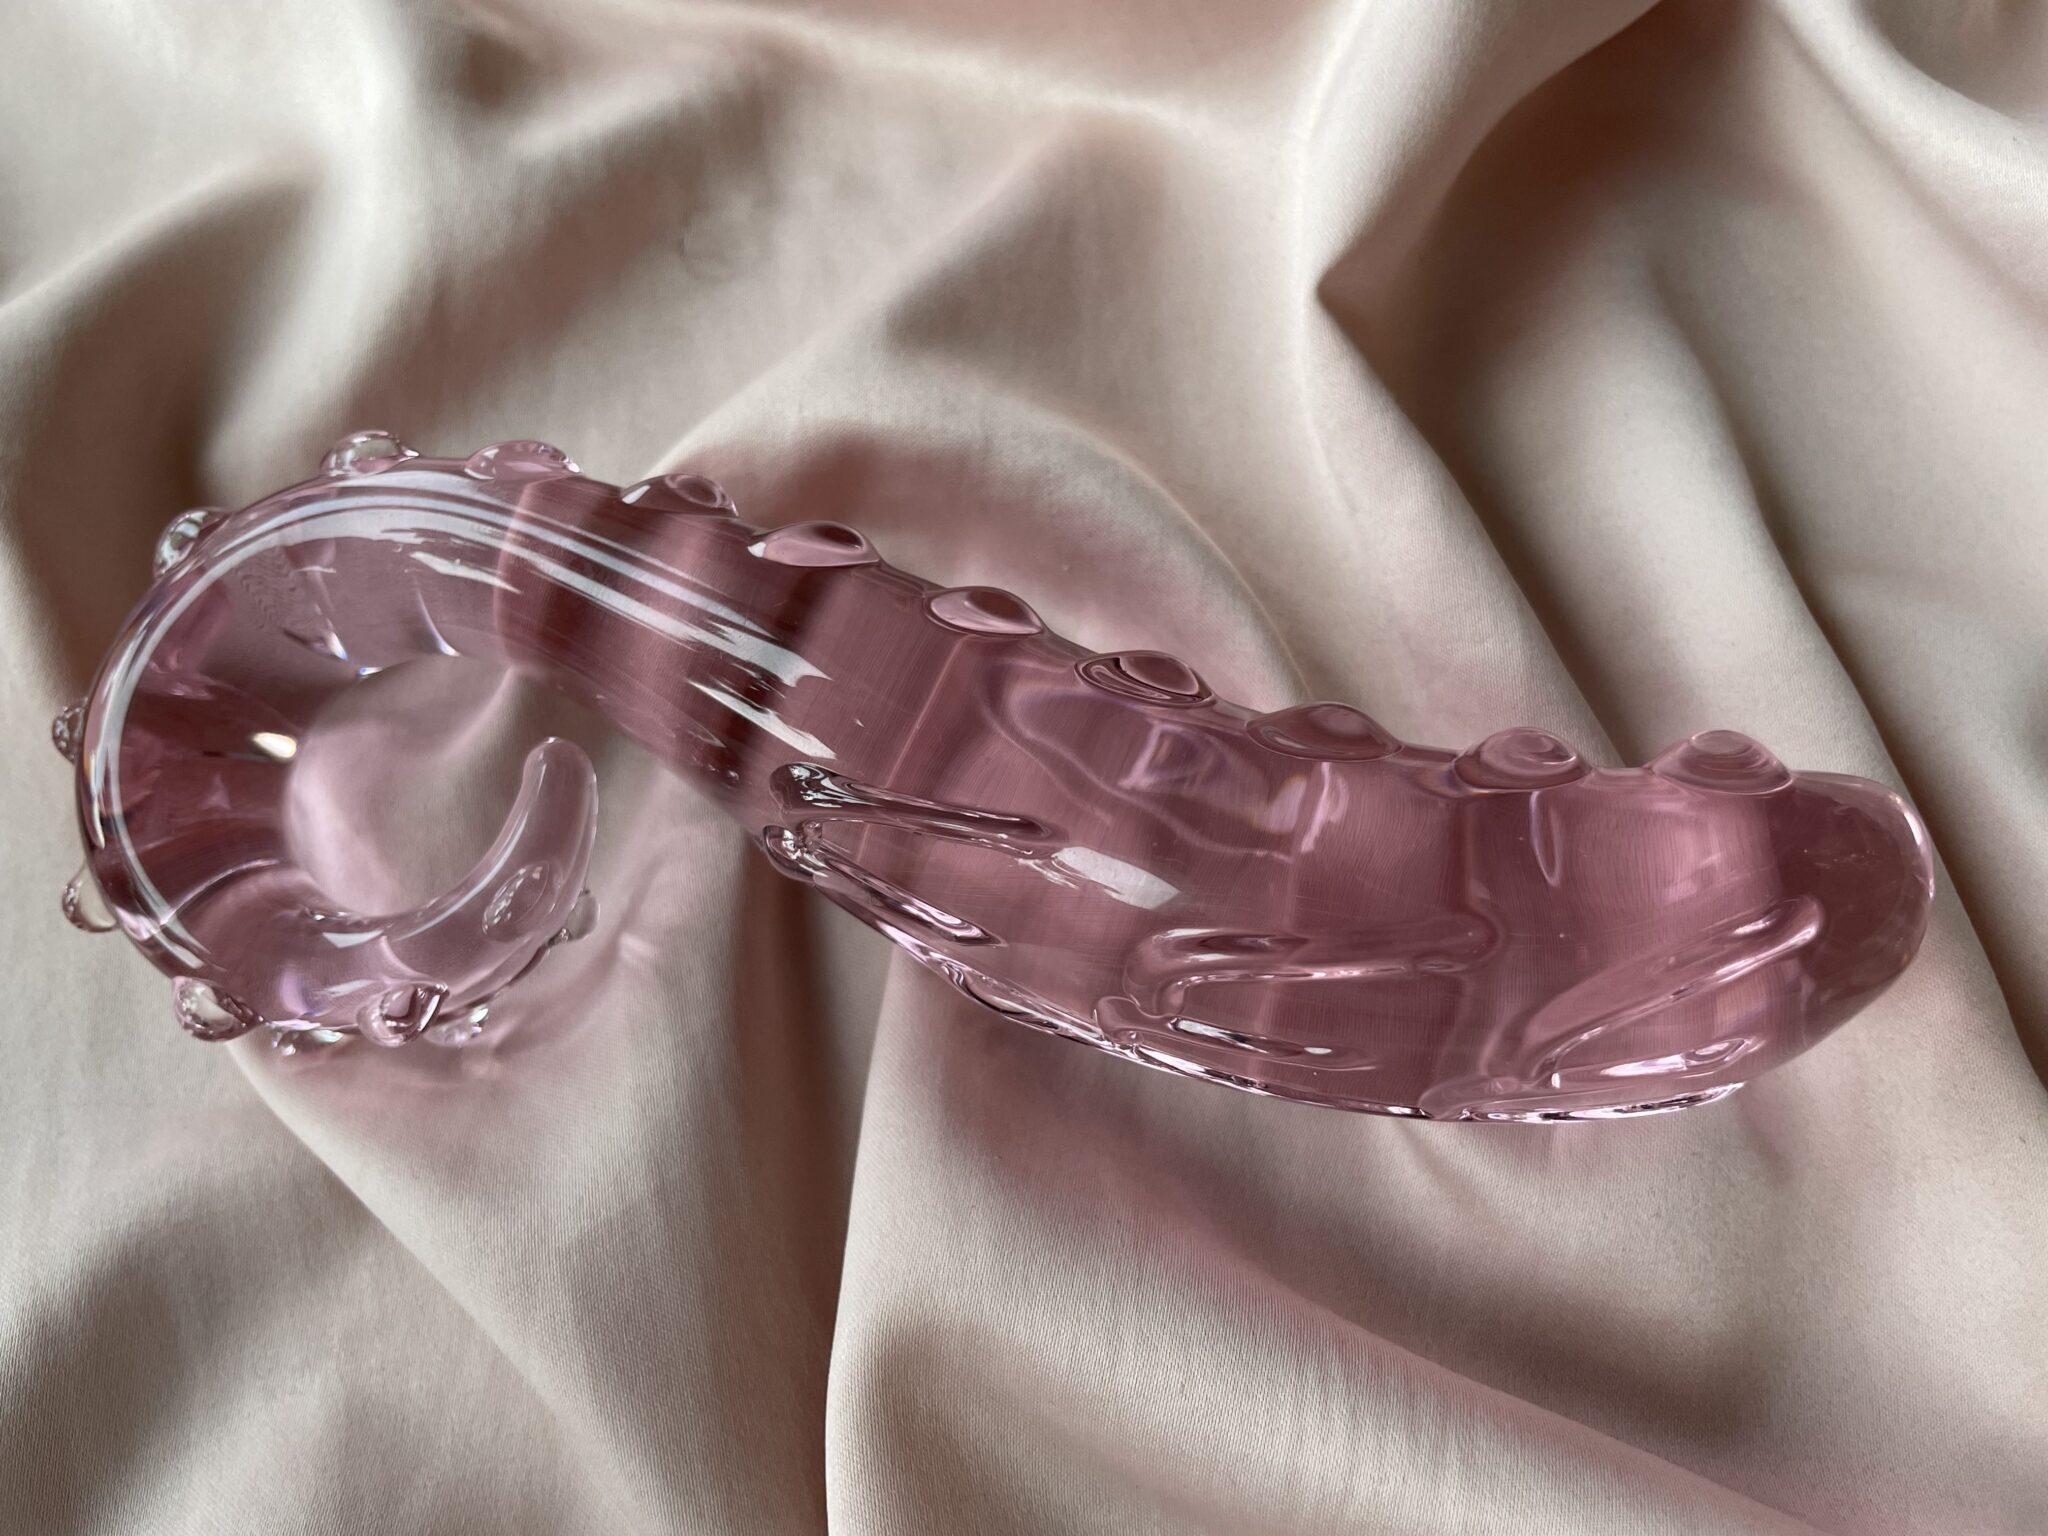 Icicles No. 24 Glass Tentacle Dildo Rating the Icicles No. 24 Glass Tentacle Dildo’s design